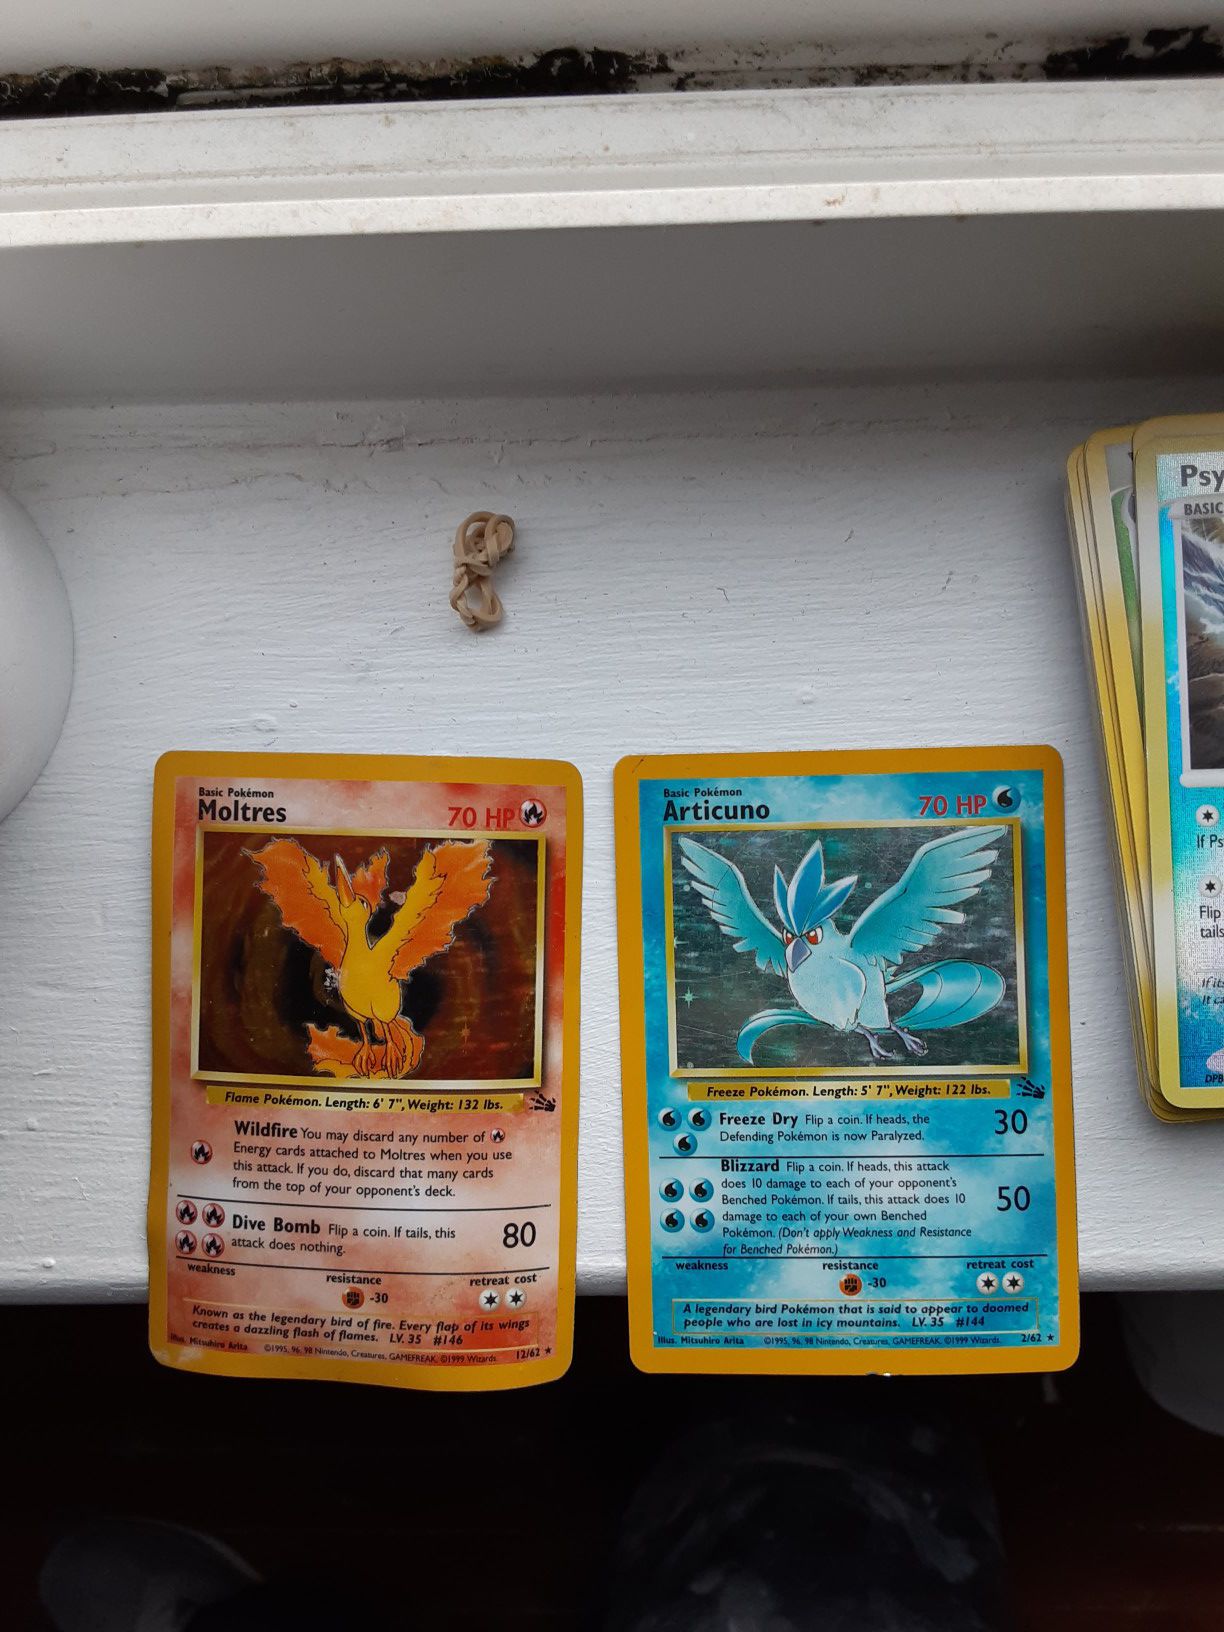 1995 pokemon cards both in good condition